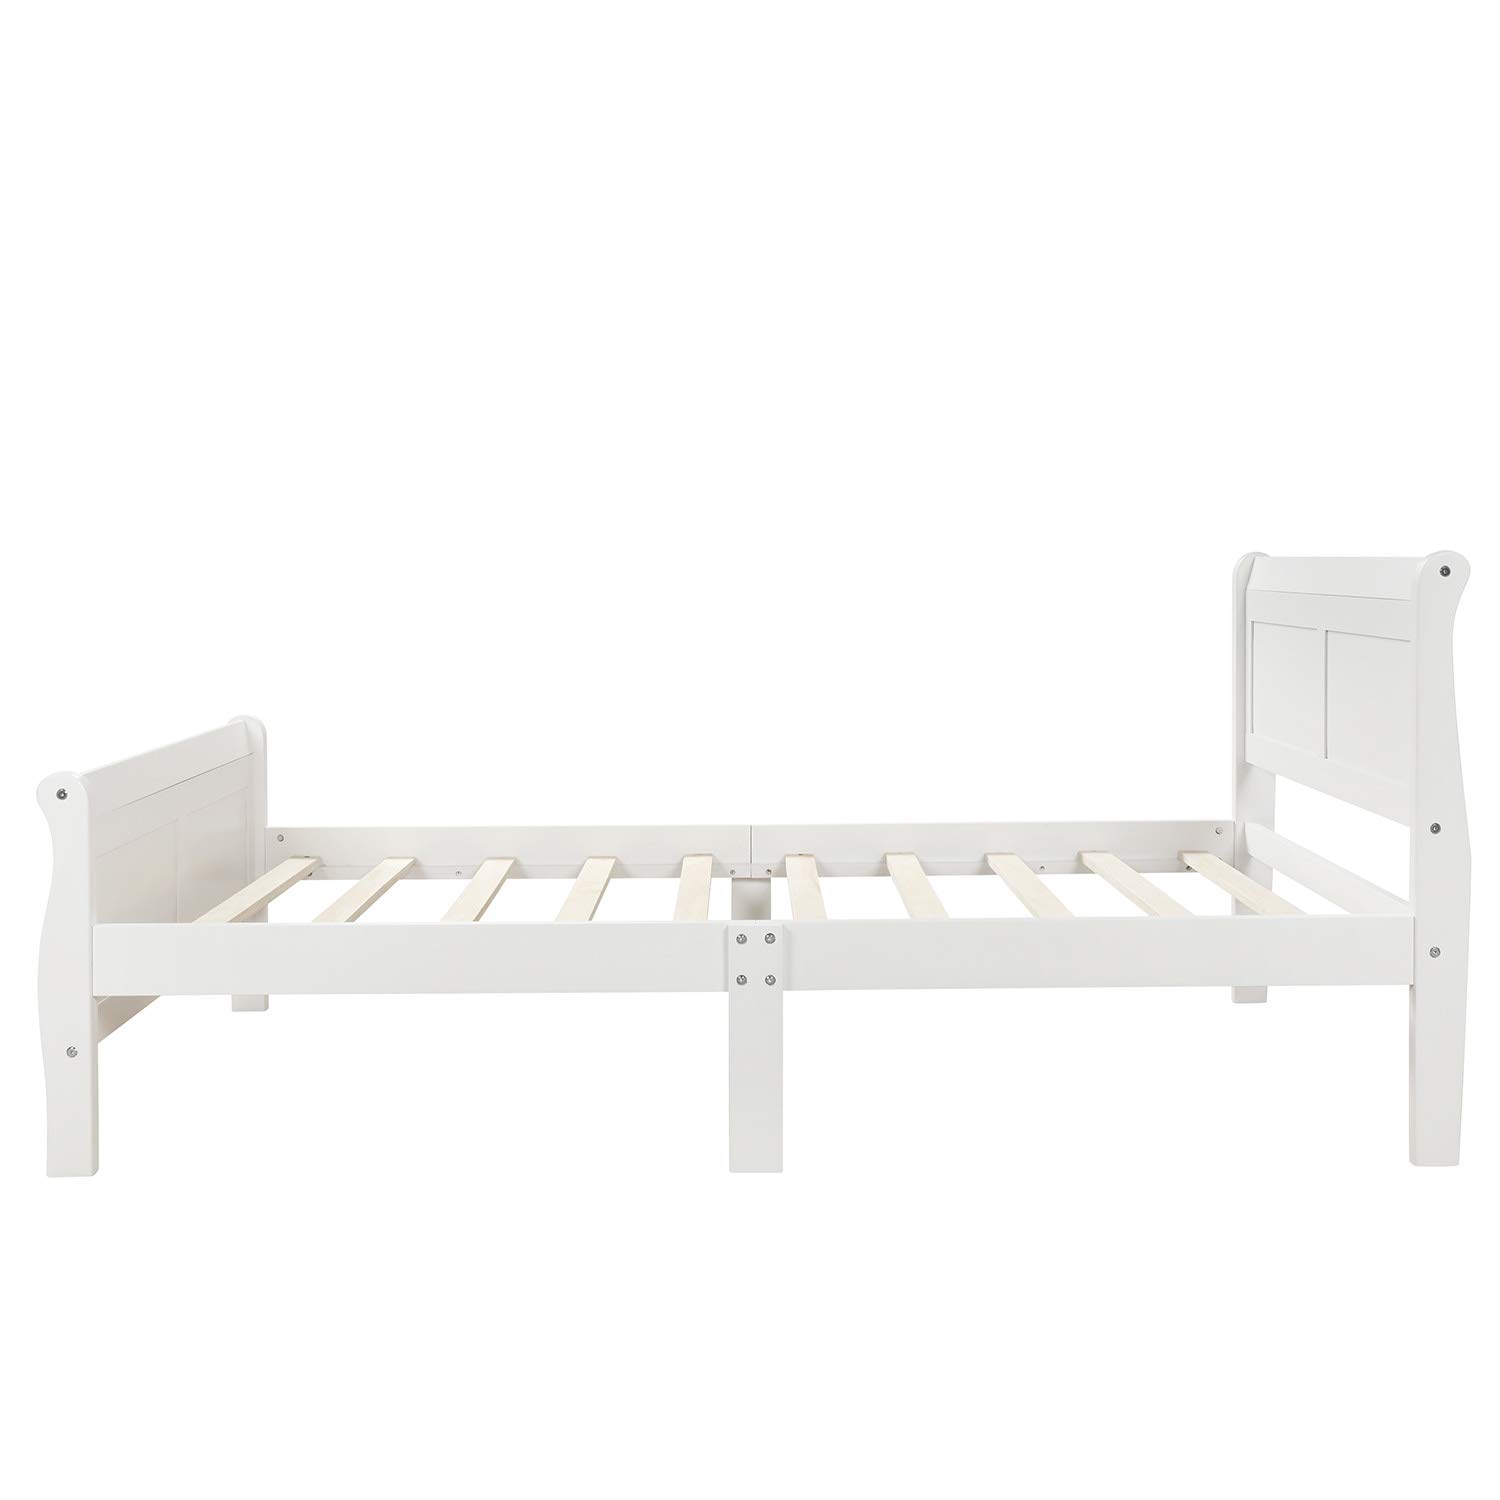 Harper & Bright Designs Twin Size Bed Frame with Headboard and Footboard, Wood Twin Platform Bed Frame with Wooden Slat Support, Sleigh Twin Bed for Kids,Boys, Girls,White